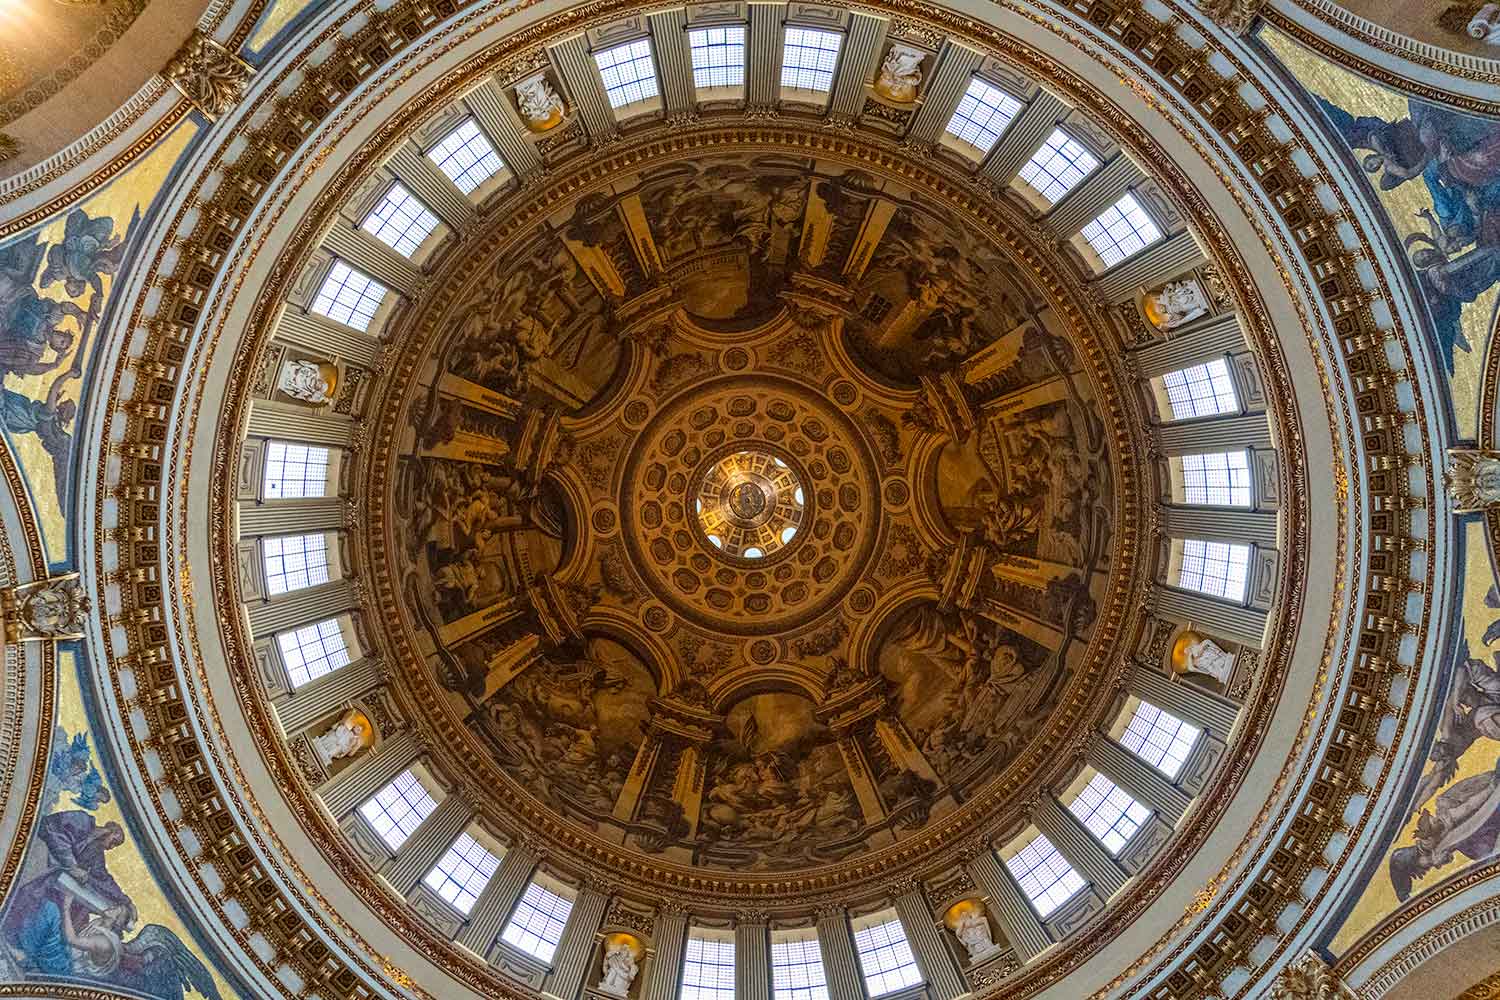 how long to visit st paul's cathedral